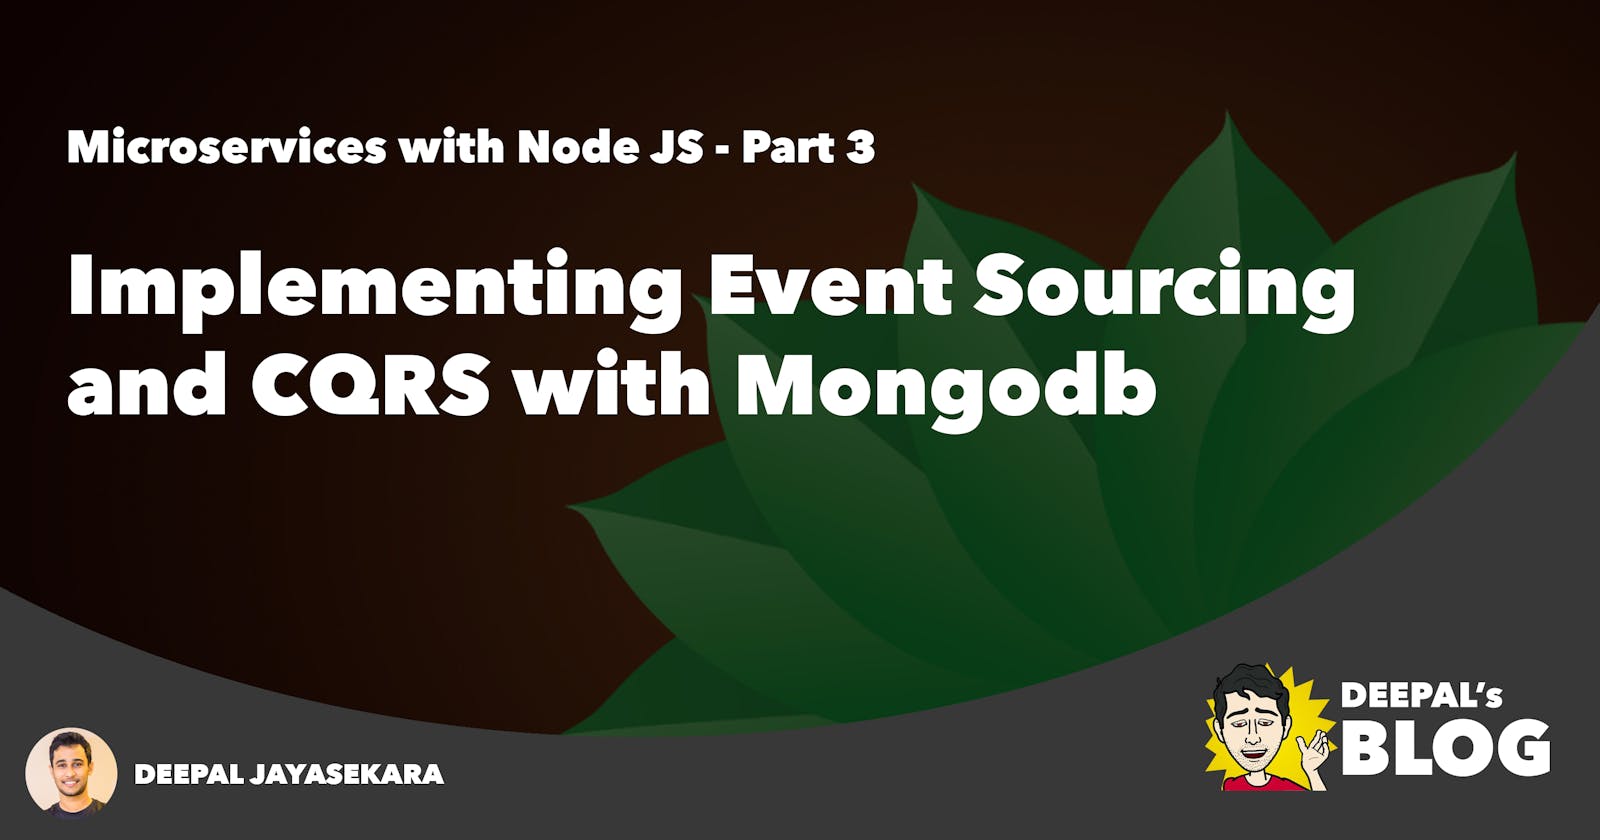 Implementing Event Sourcing and CQRS pattern with MongoDB